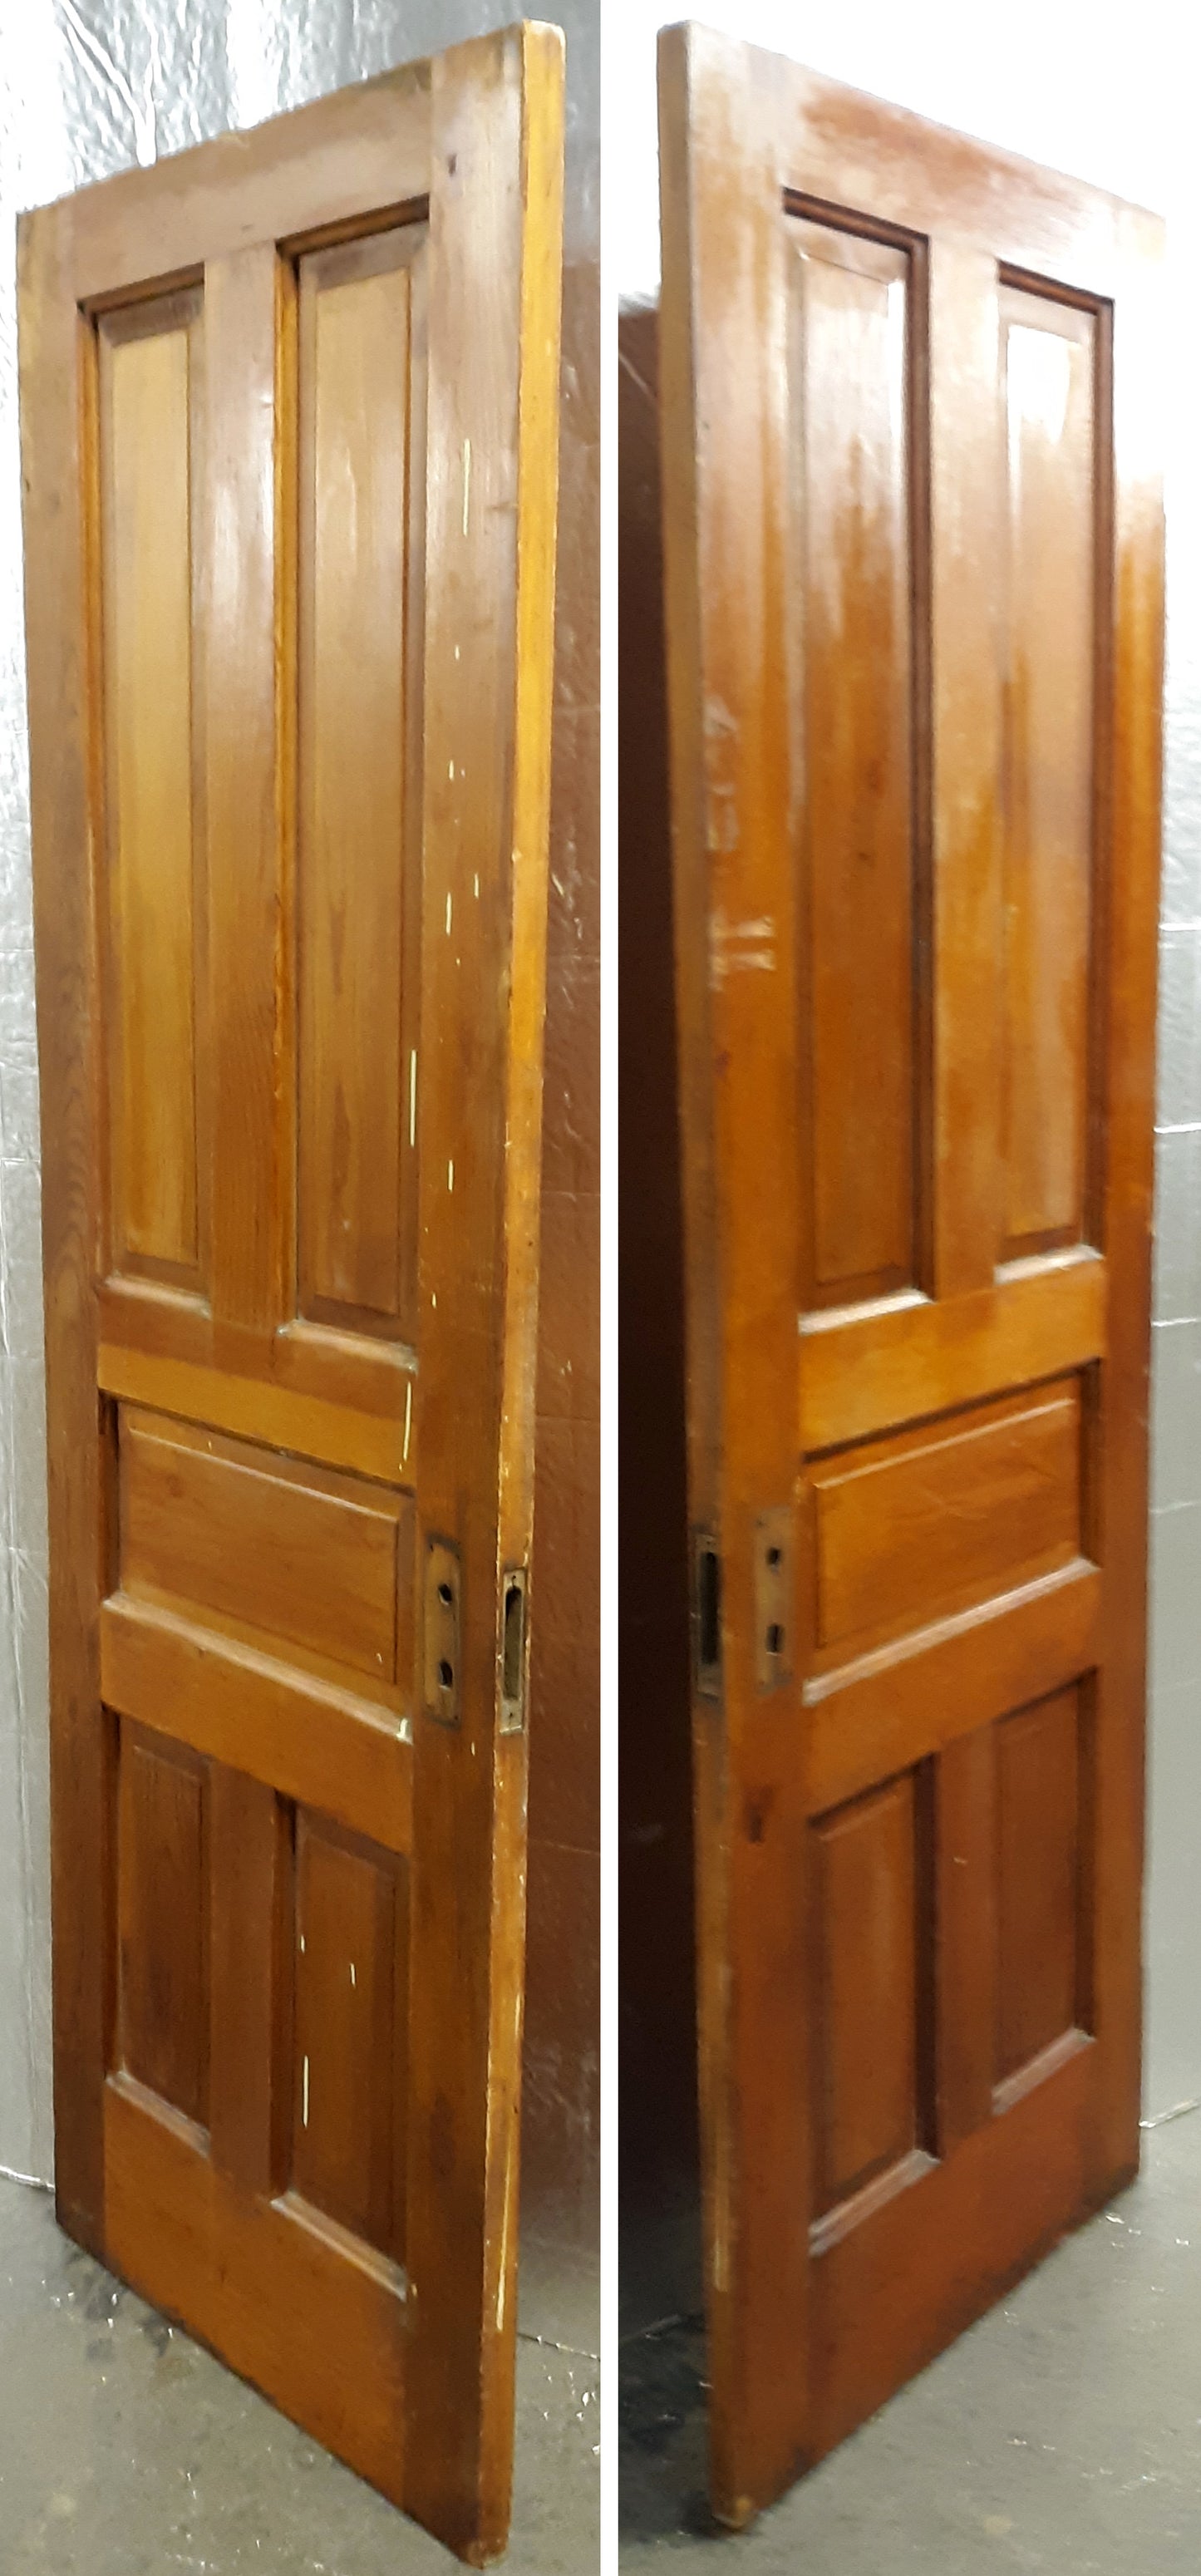 28x78" Antique Vintage Old Reclaimed Salvaged Victorian Interior SOLID Wood Wooden Pantry Door 5 Panels